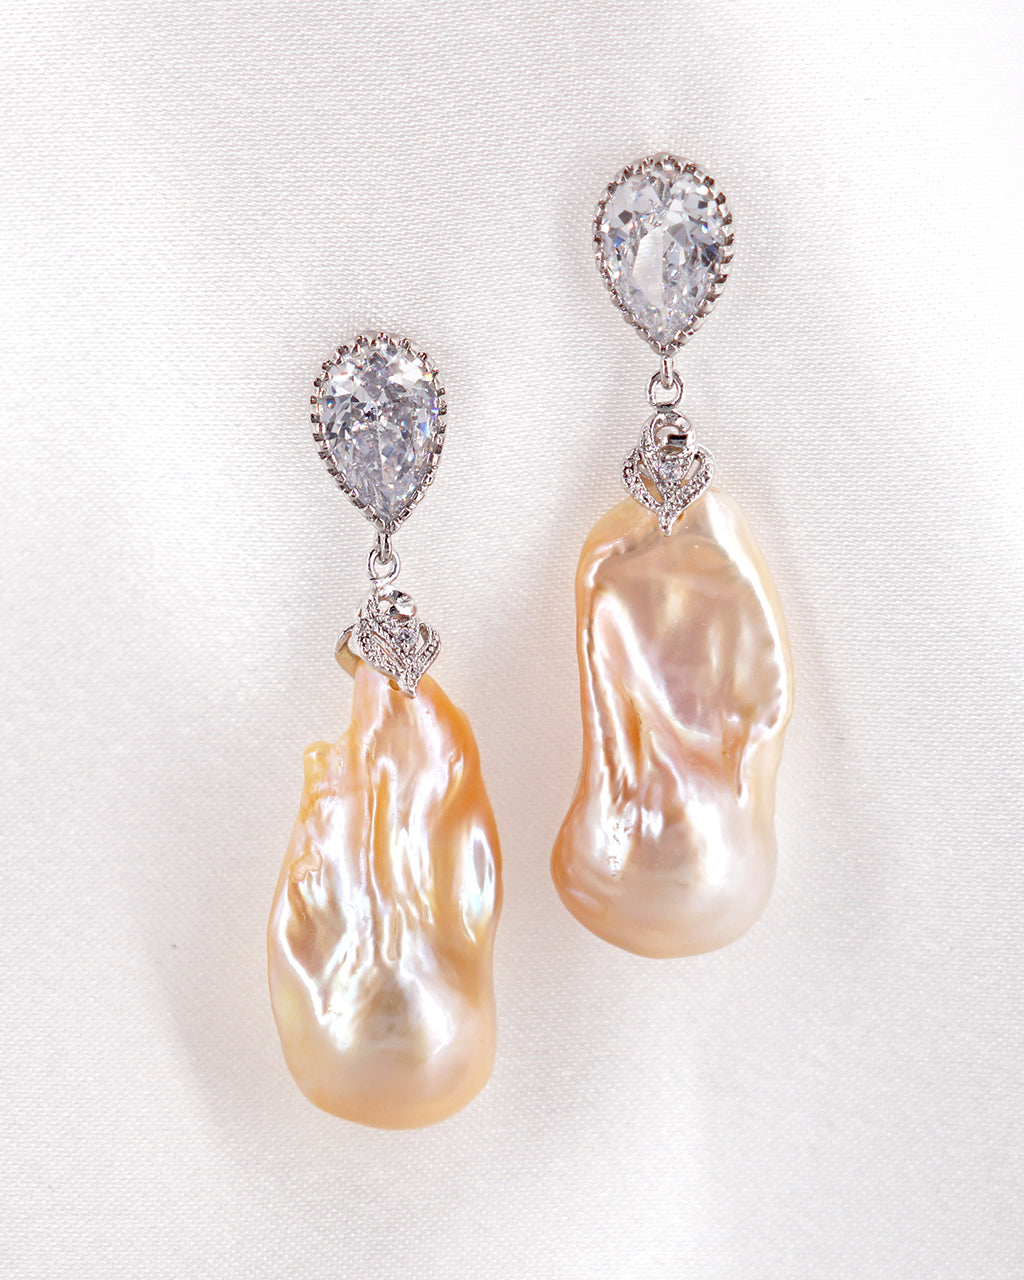 Statement Baroque Pearl Earrings - Golden Flameball - Wedding Bridal Jewelry for Brides and Bridesmaids | Singapore